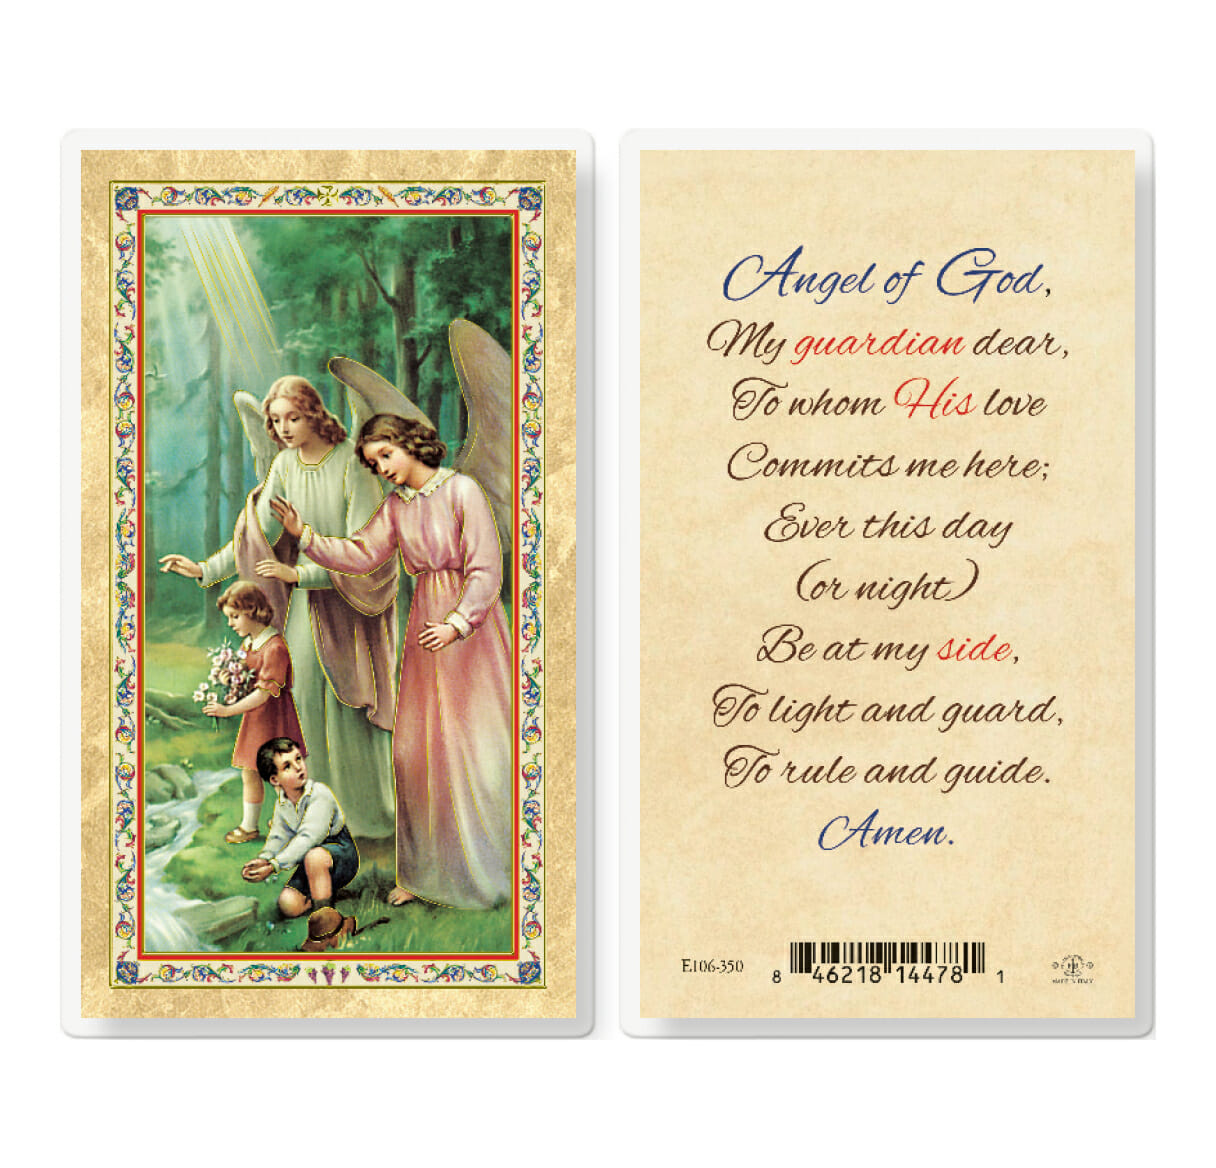 Guardian Angel - Angel of God Gold-Stamped Laminated Holy Card - 25 Pack -  Buy Religious Catholic Store